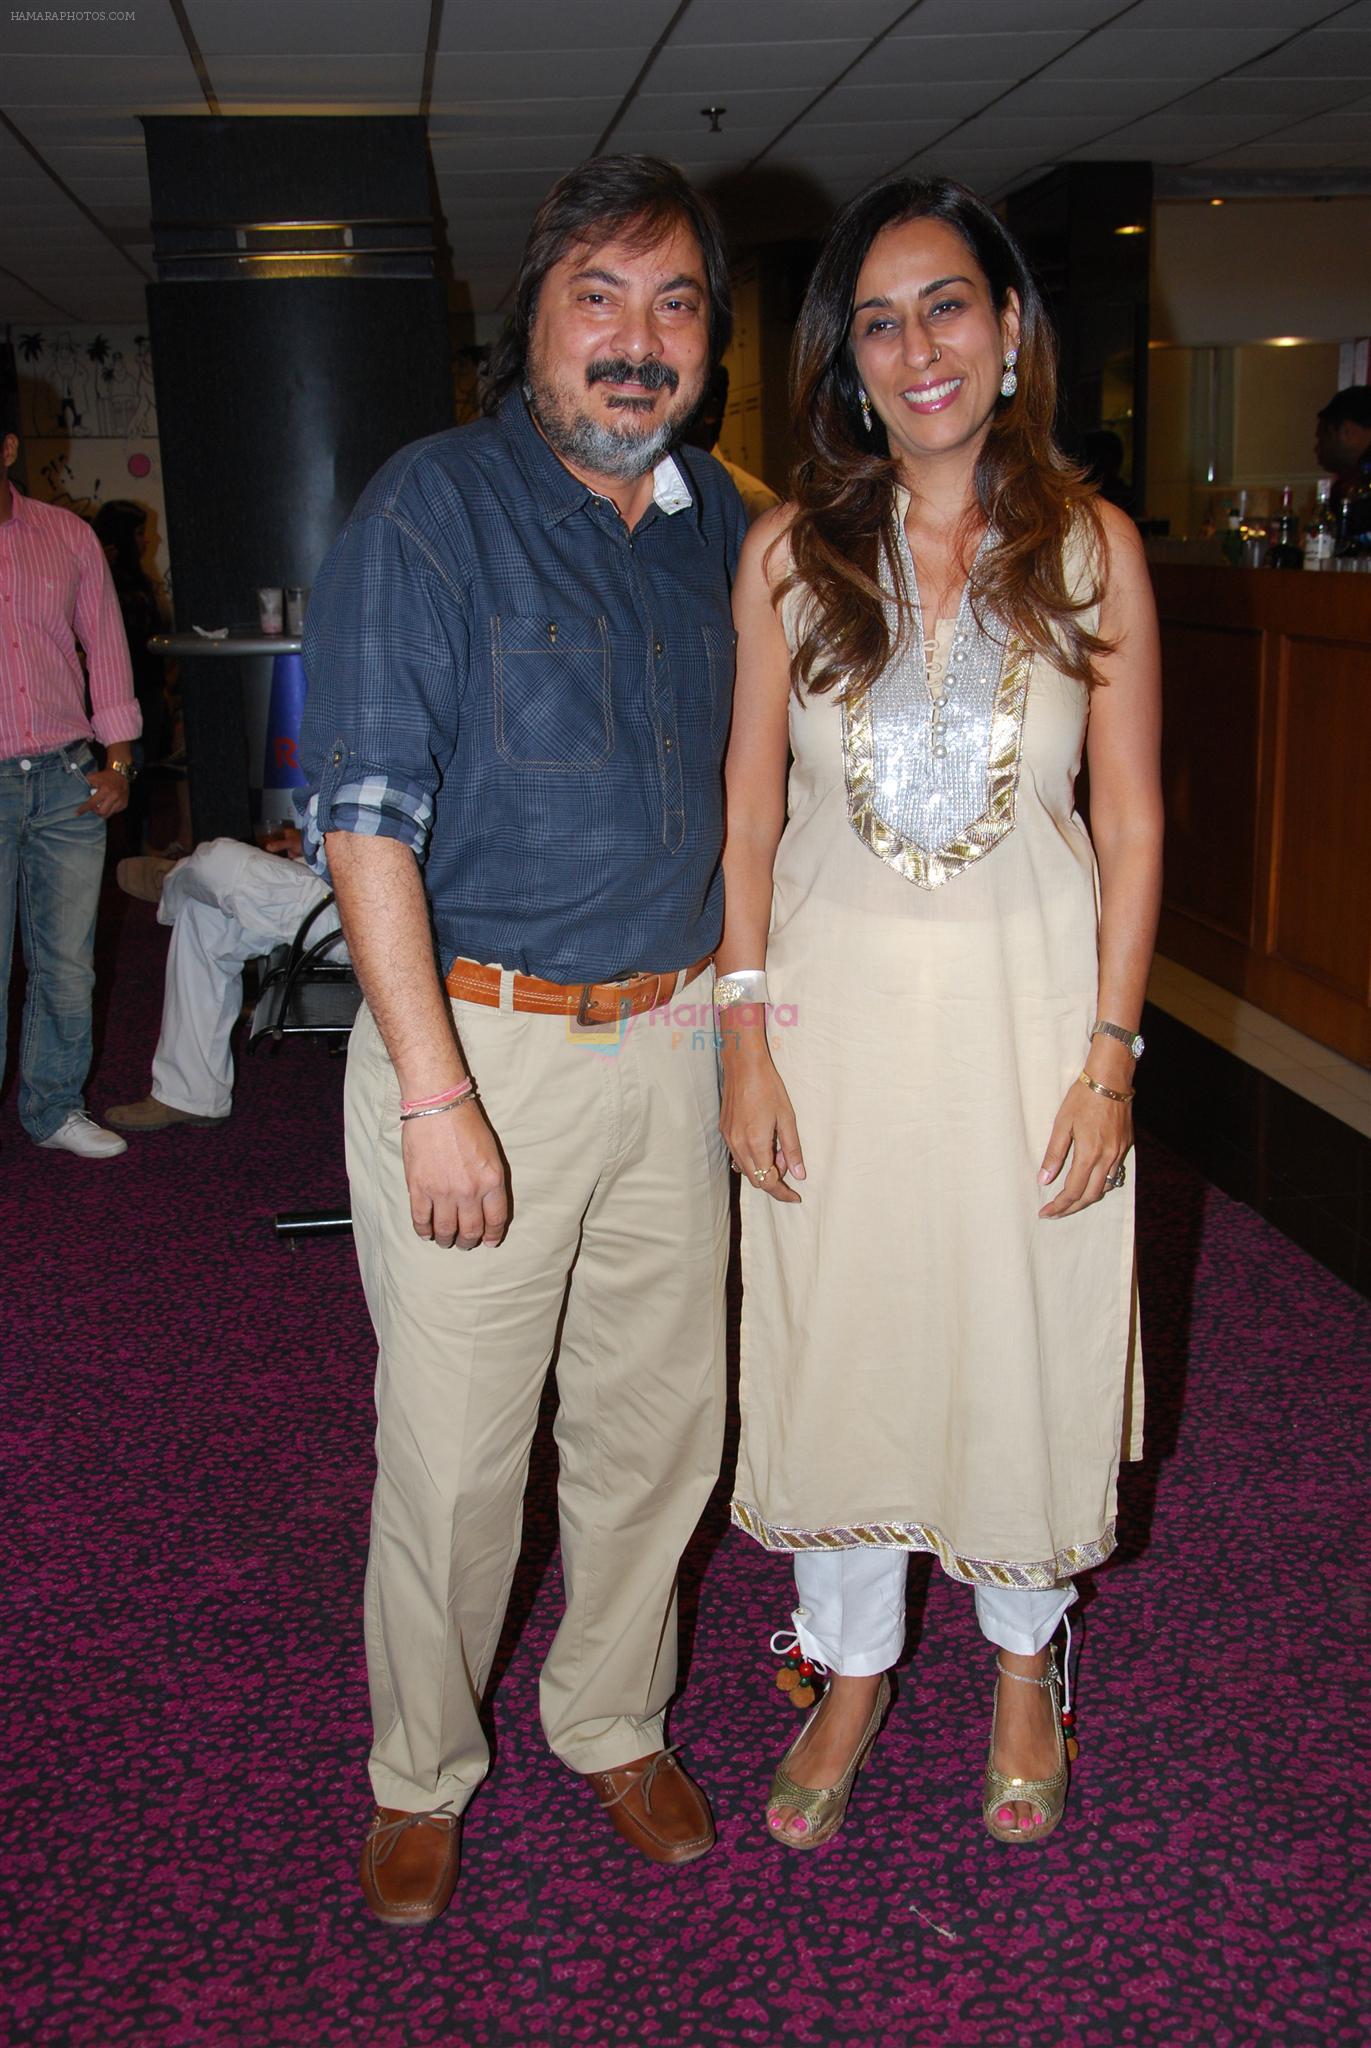 Tony with Deeya Singh at the Celebration of the Completion Party of 100 Episodes of PARVARISH kuch khatti kuch meethi in bowling alley on 7th April 2012